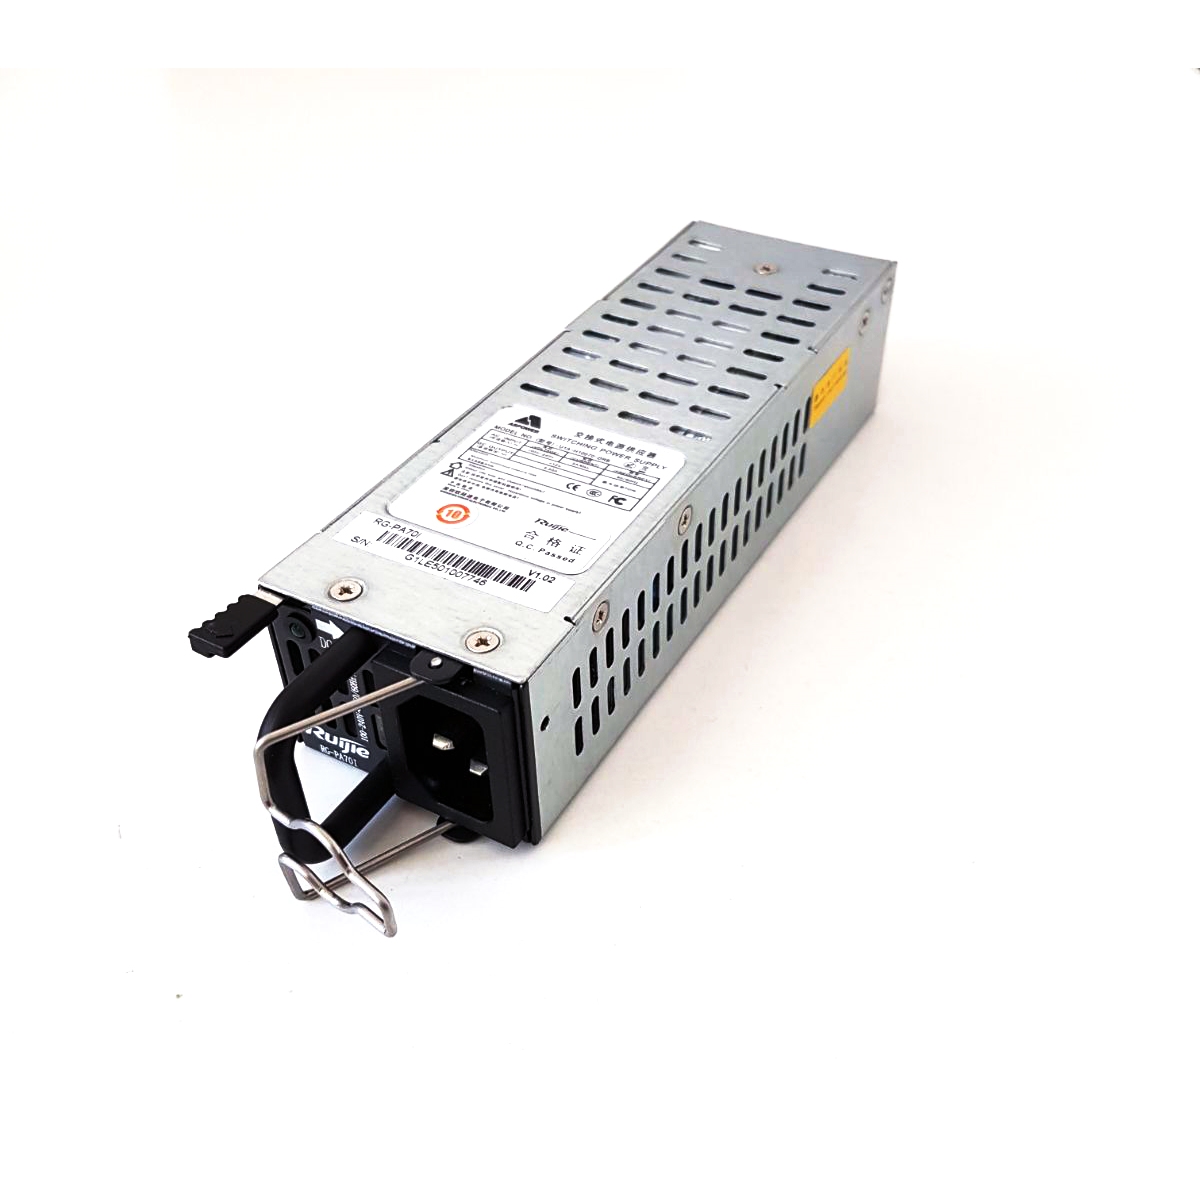 RUIJIE RG-PA70I S5750H SWITCHES AC POWER MODULE